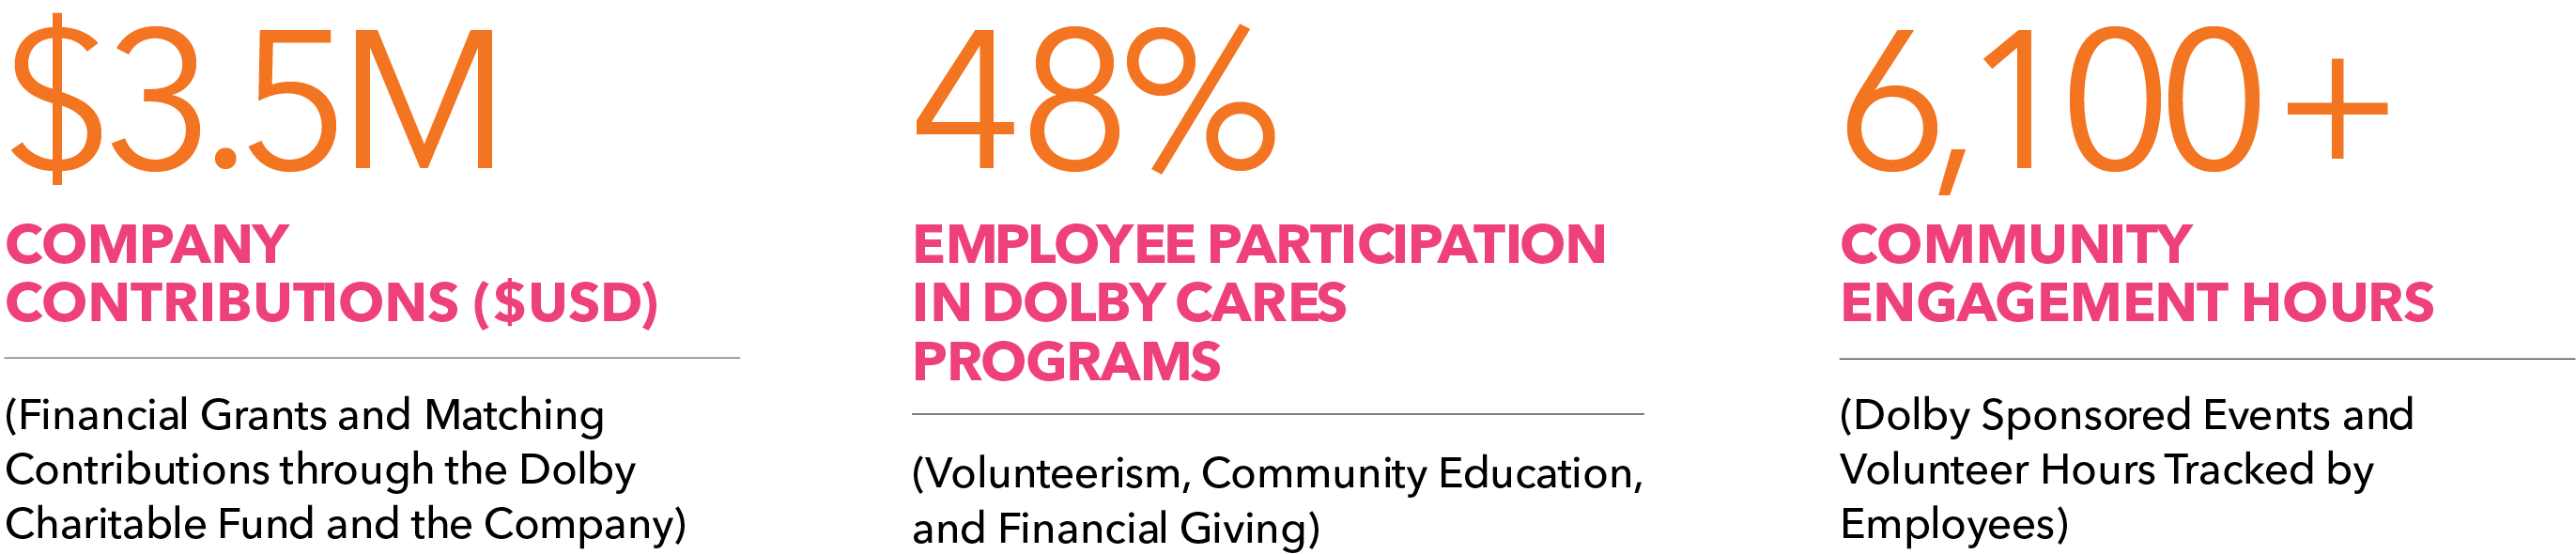 Dolby Social Impact Data.png